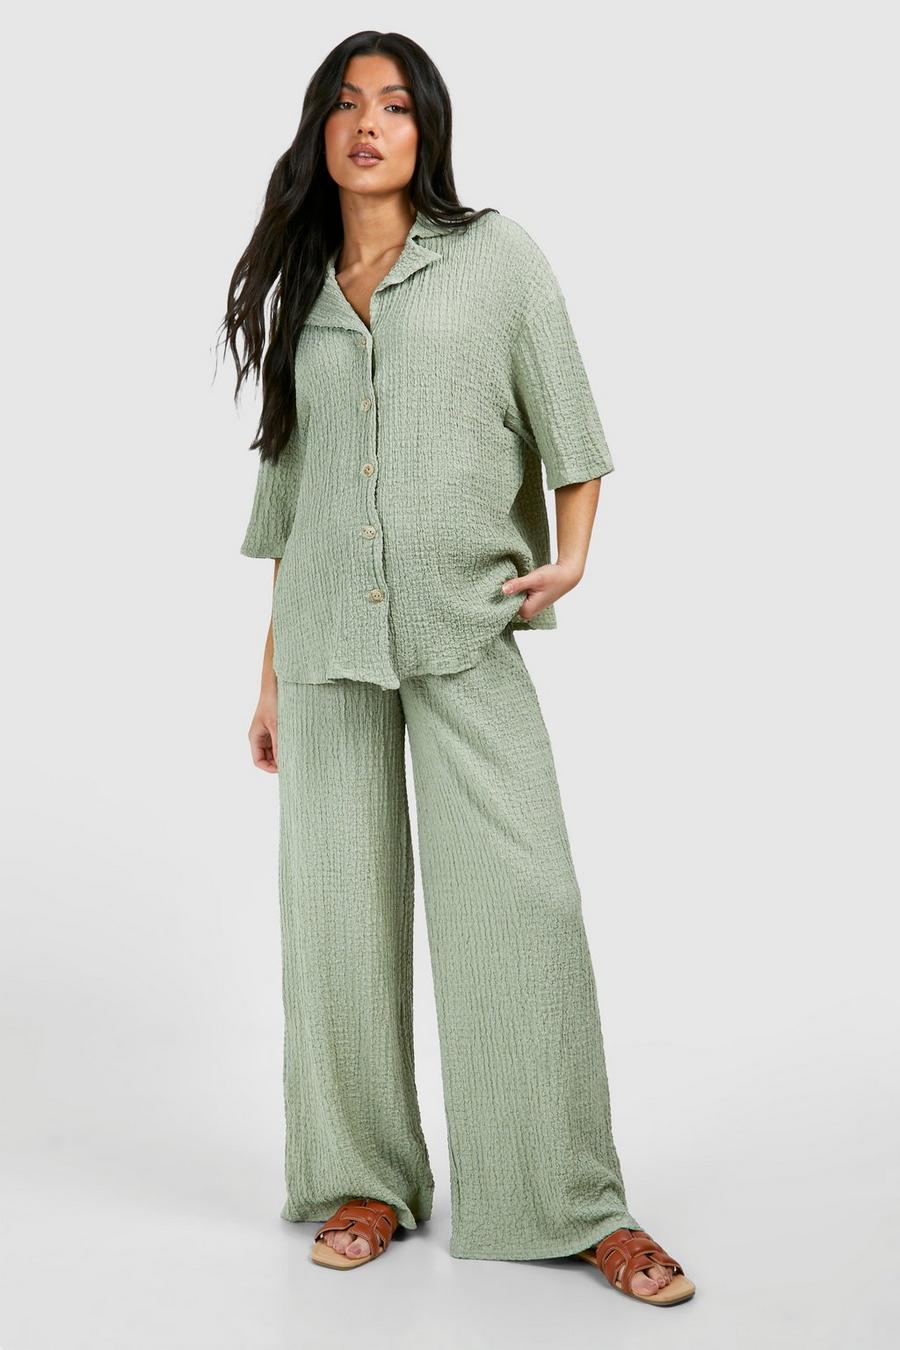 Sage Maternity Honeycomb Textured Short Sleeve Pants Two-Piece